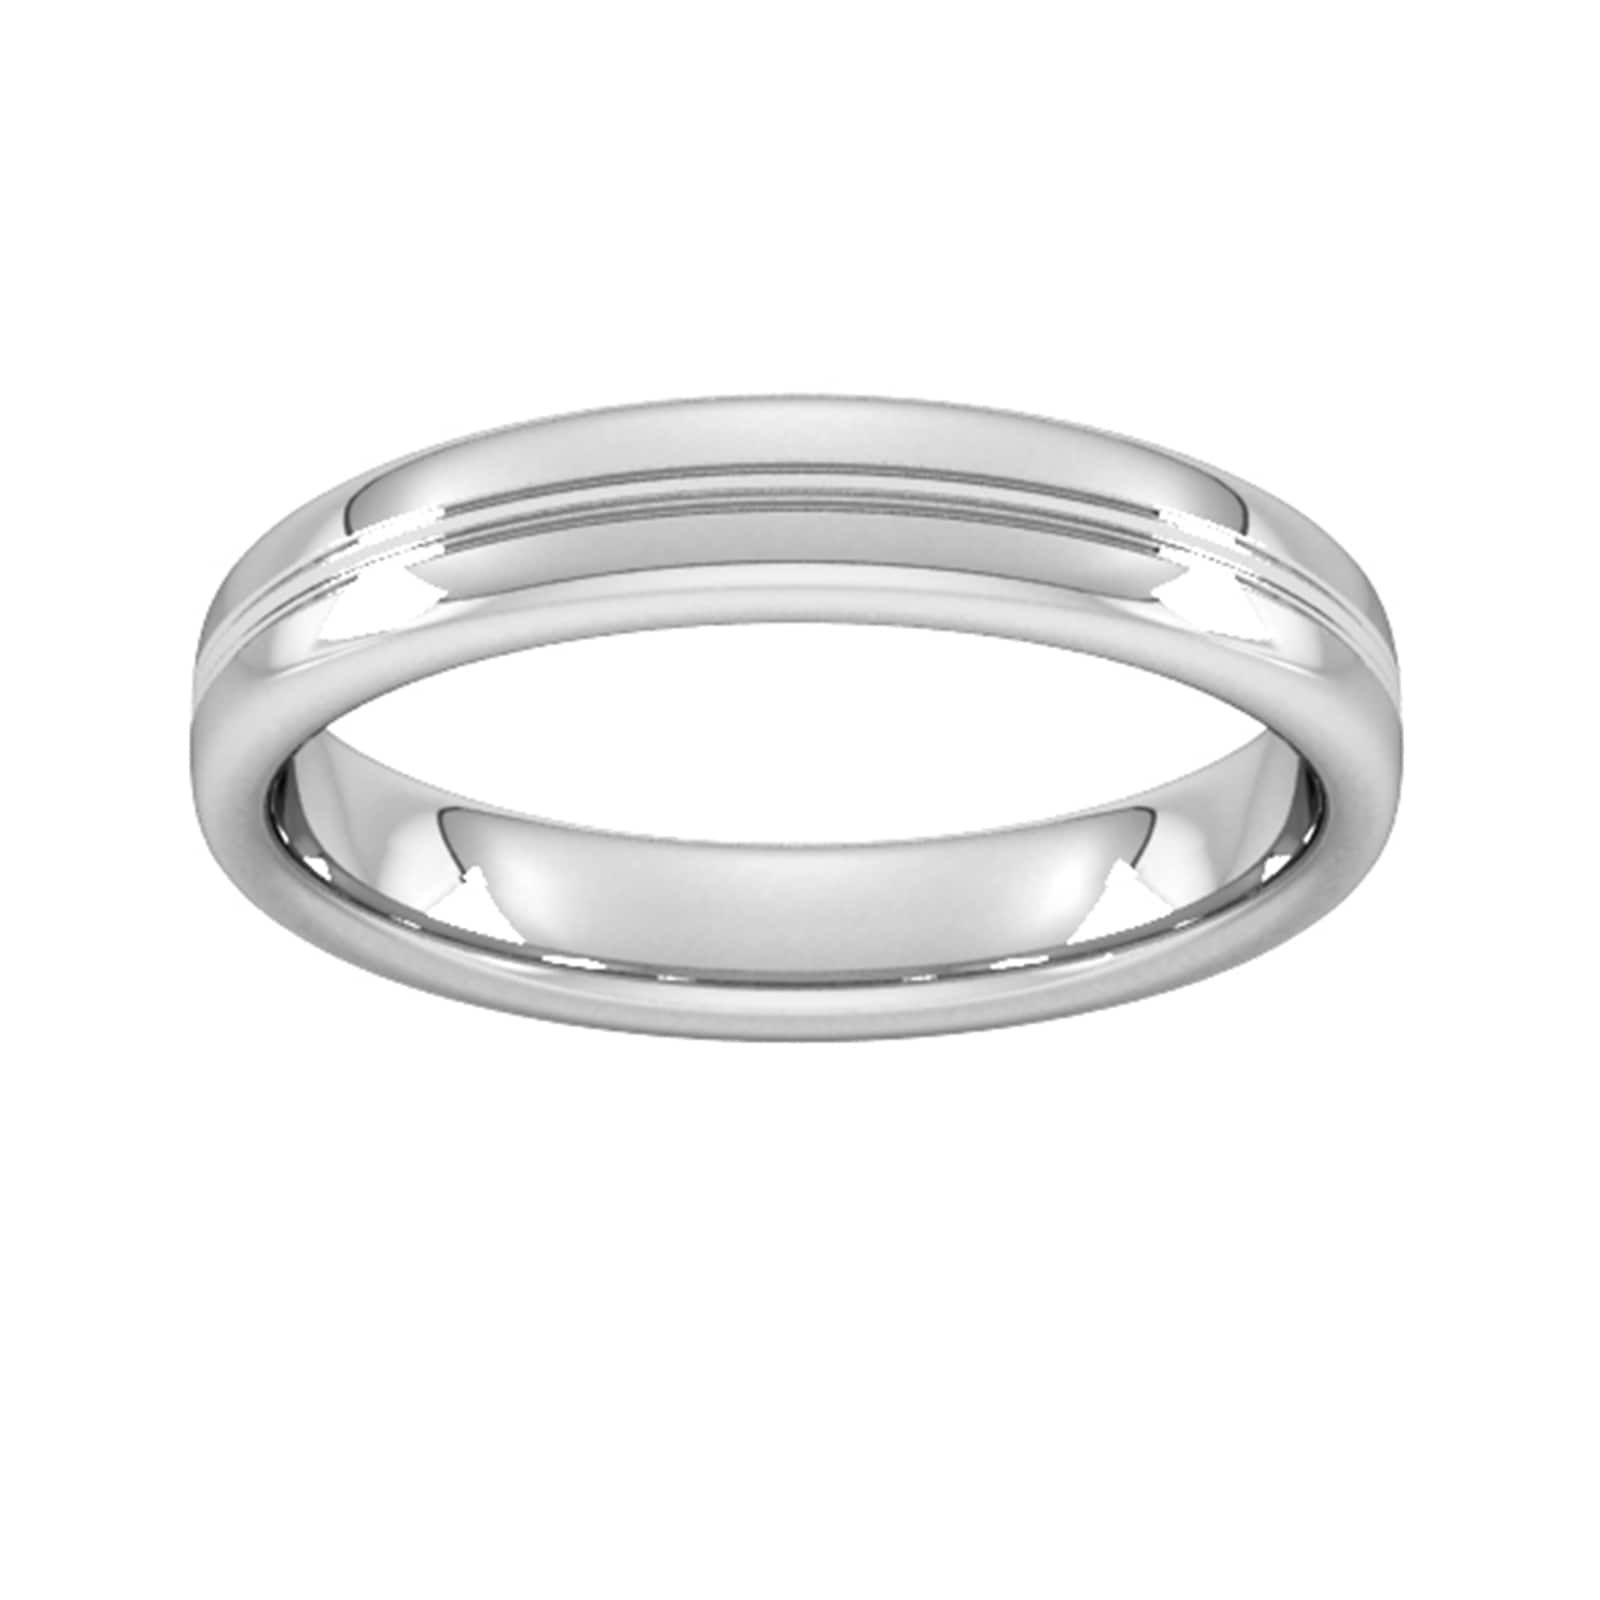 4mm Slight Court Standard Grooved Polished Finish Wedding Ring In 950 Palladium - Ring Size P